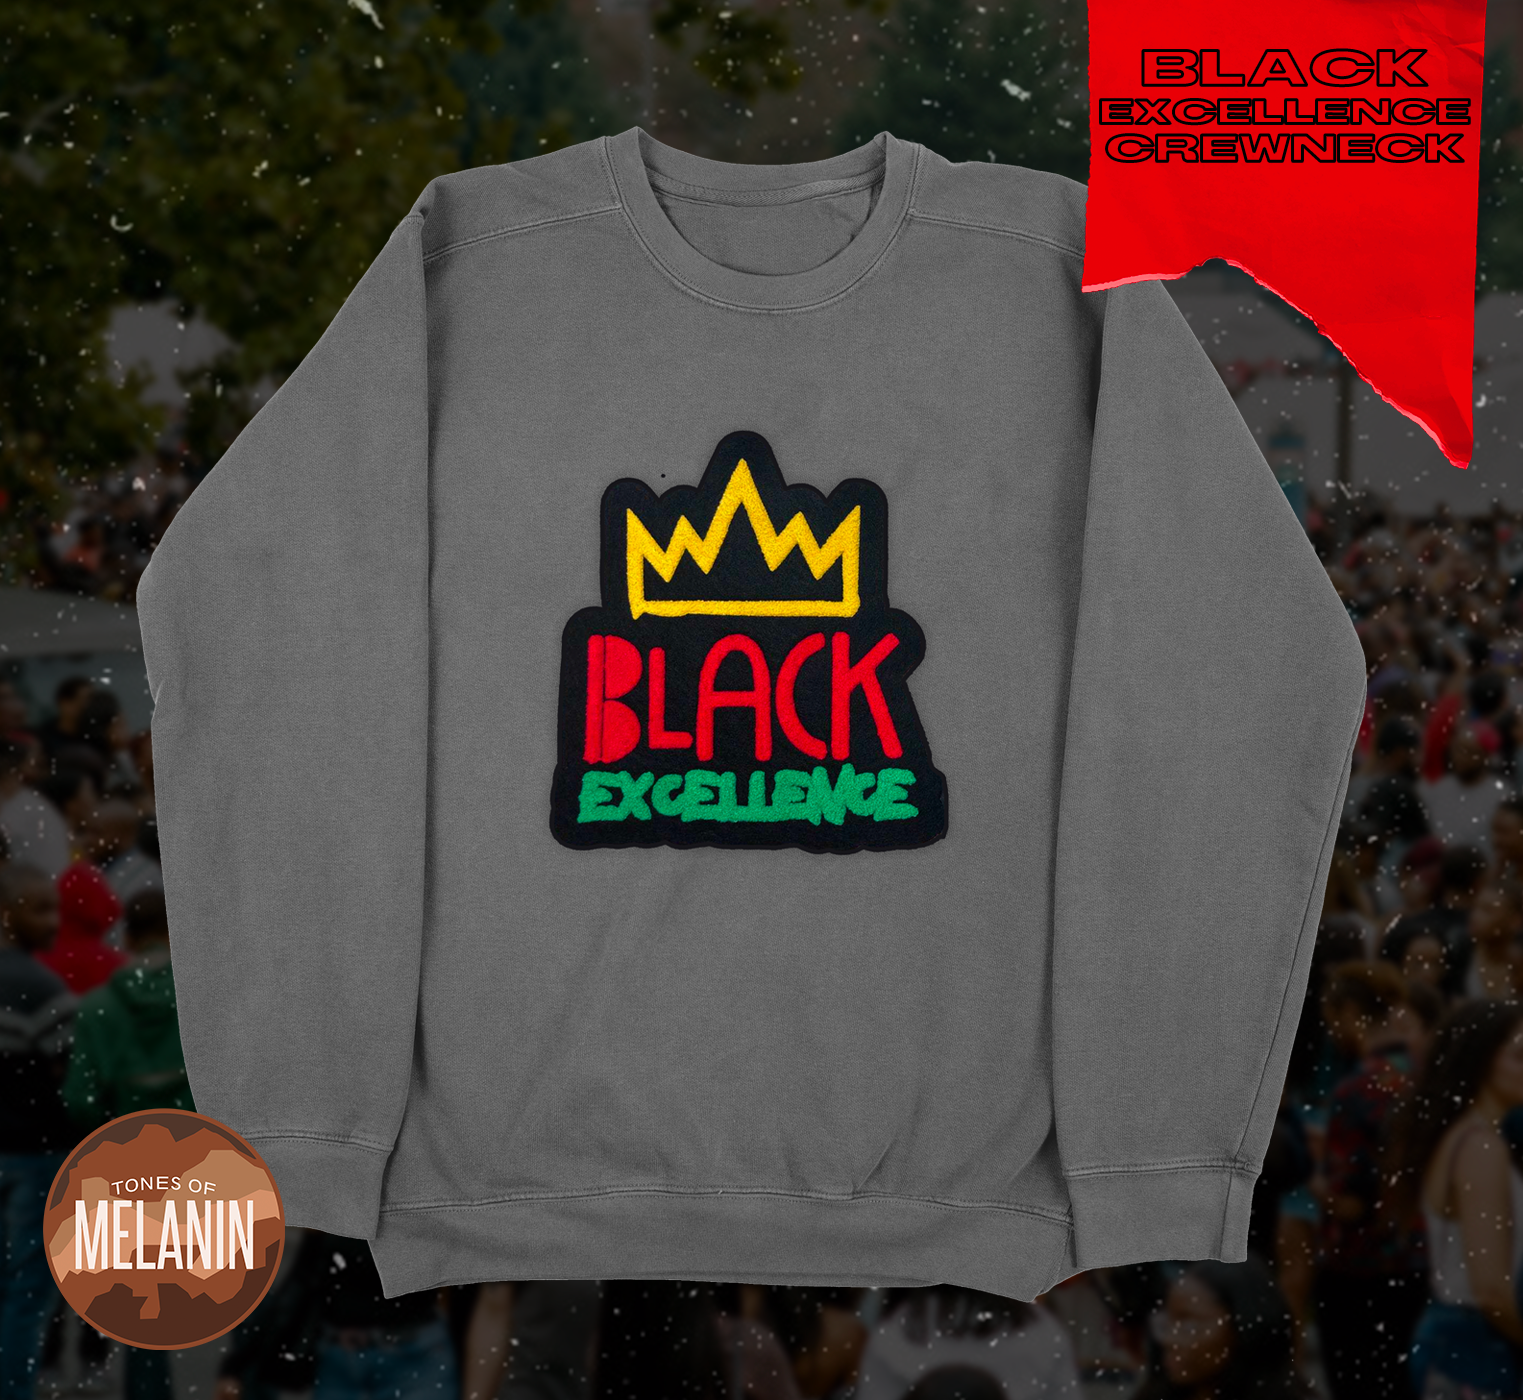 Grey Black Excellence Chenille Patch Sweatshirt